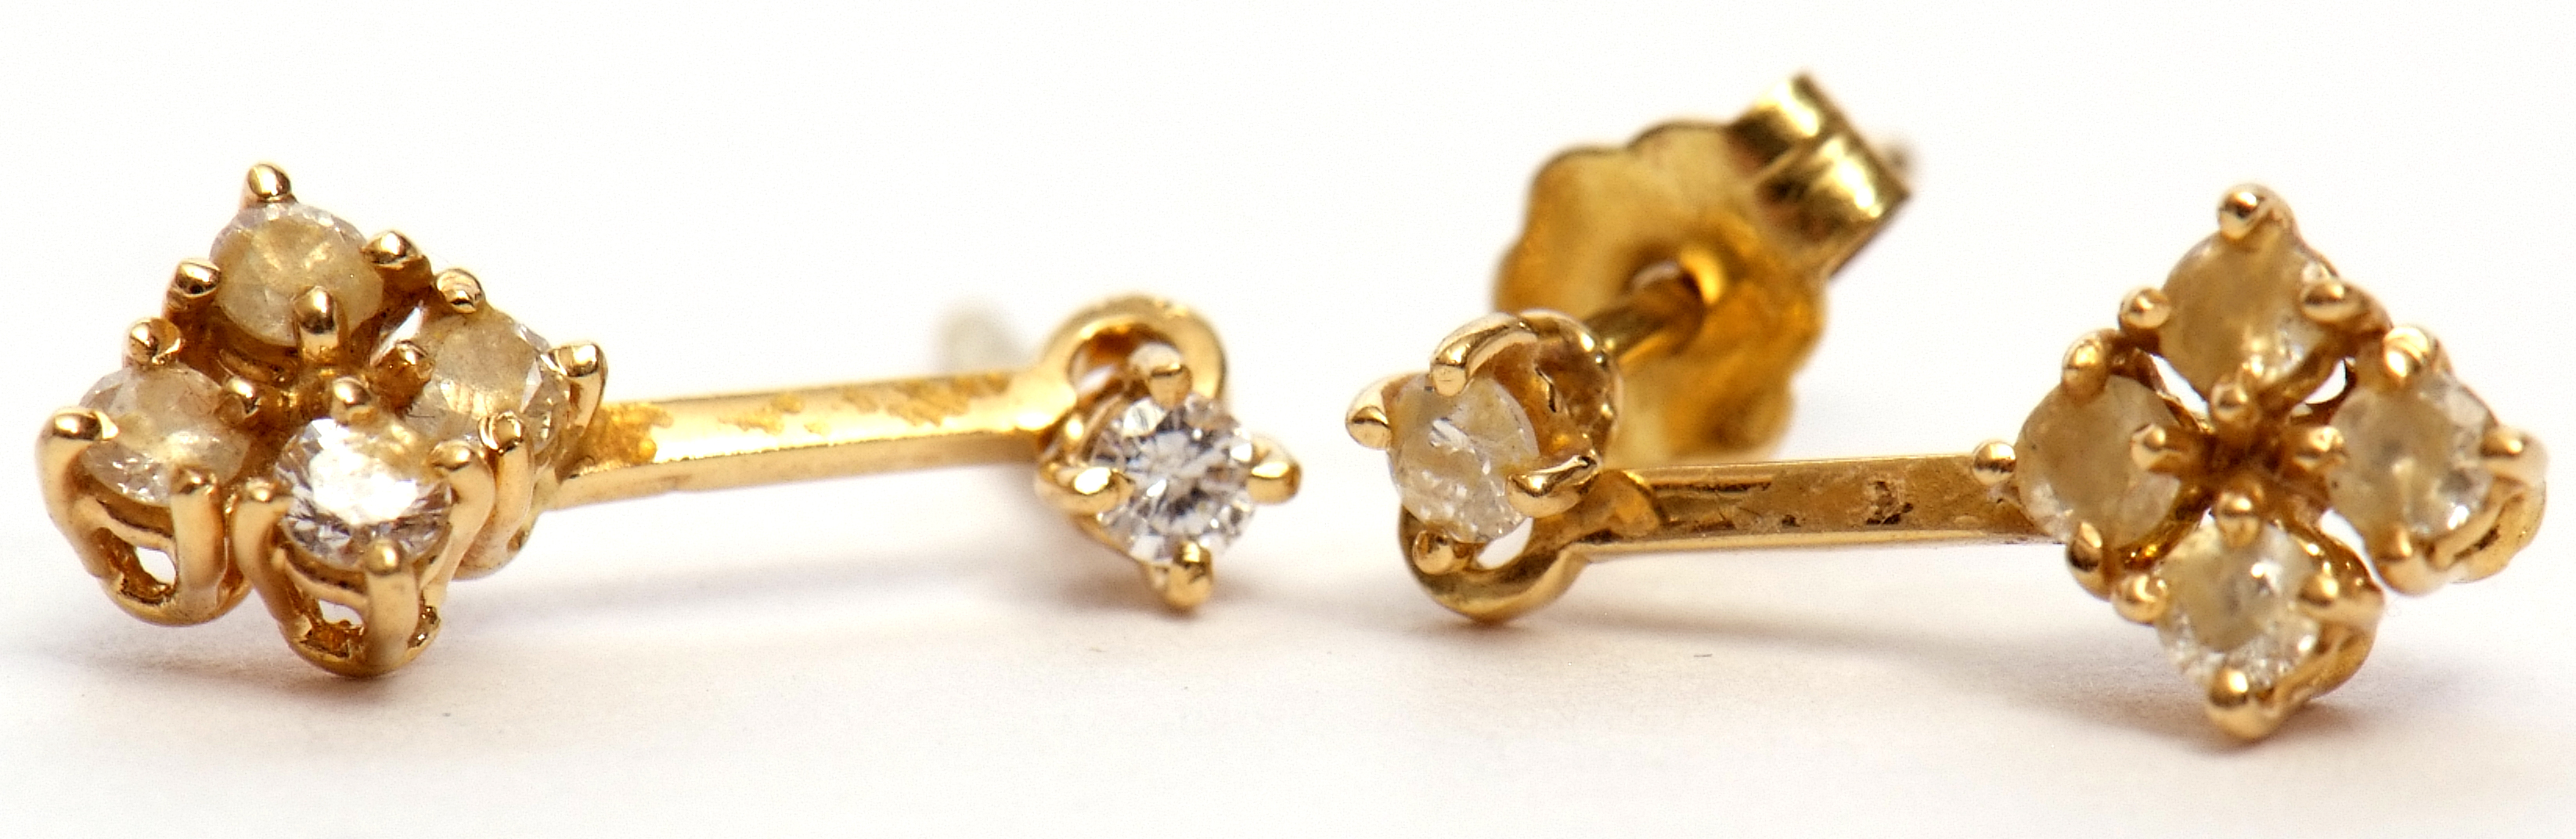 Pair of 18ct gold and diamond pendant earrings featuring a cluster of 4 small diamonds on a bar to a - Image 3 of 3